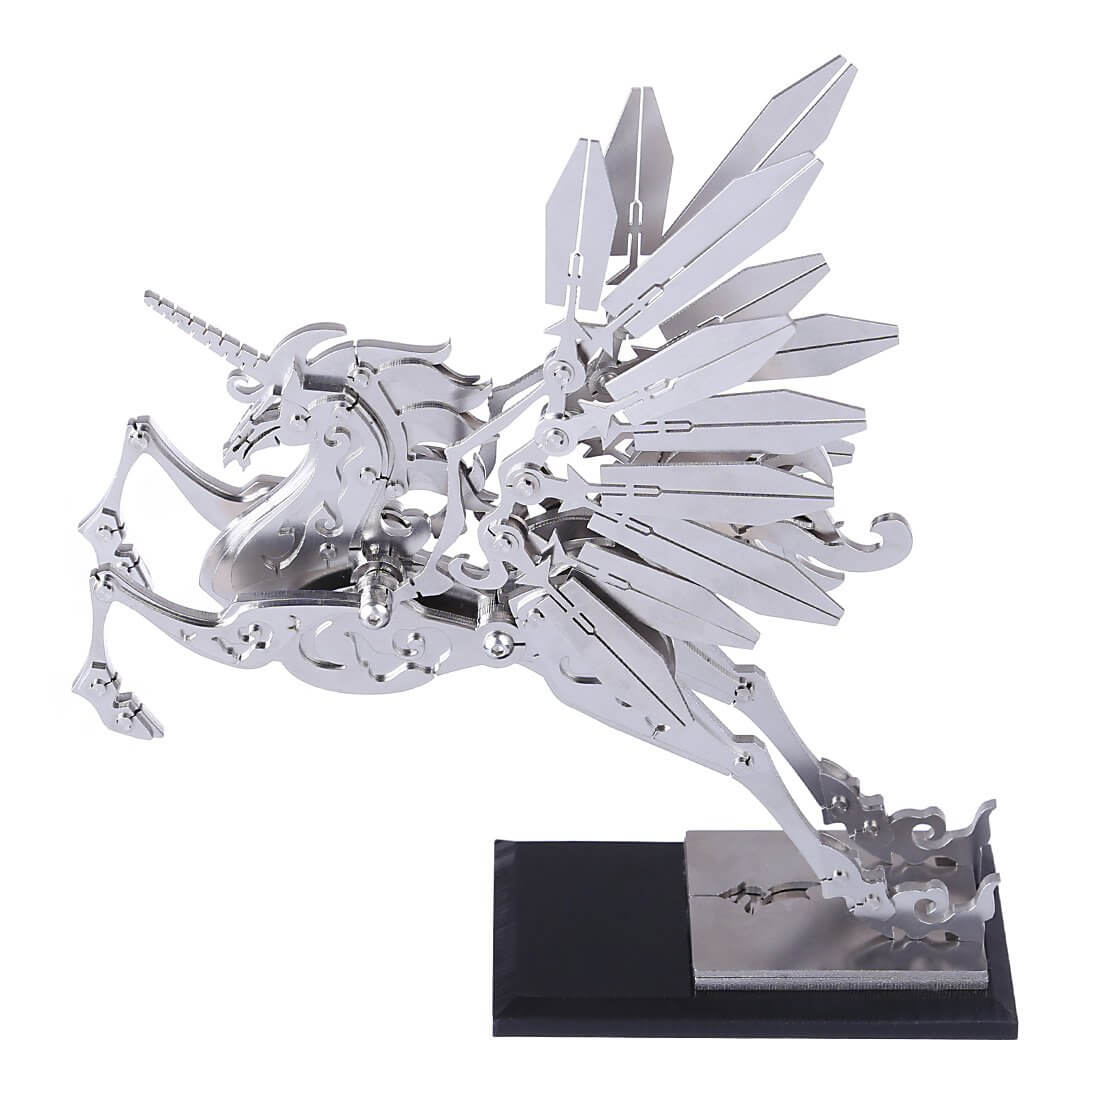 3D Assembly Stainless Steel Medium Unicorn Puzzle Model